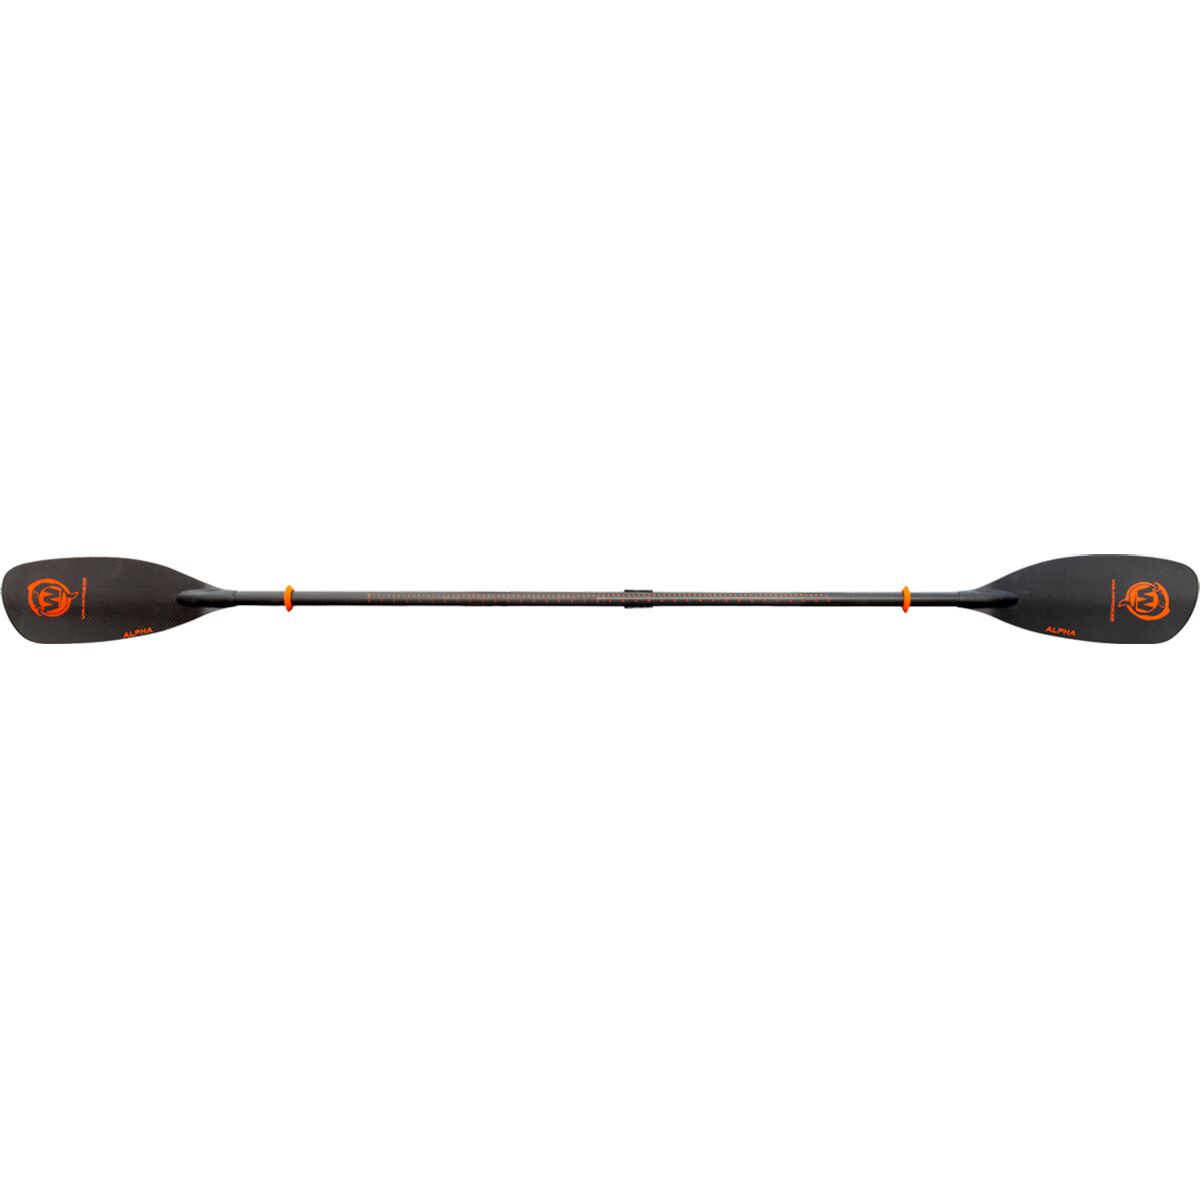 Wilderness Systems Alpha Carbon Paddle